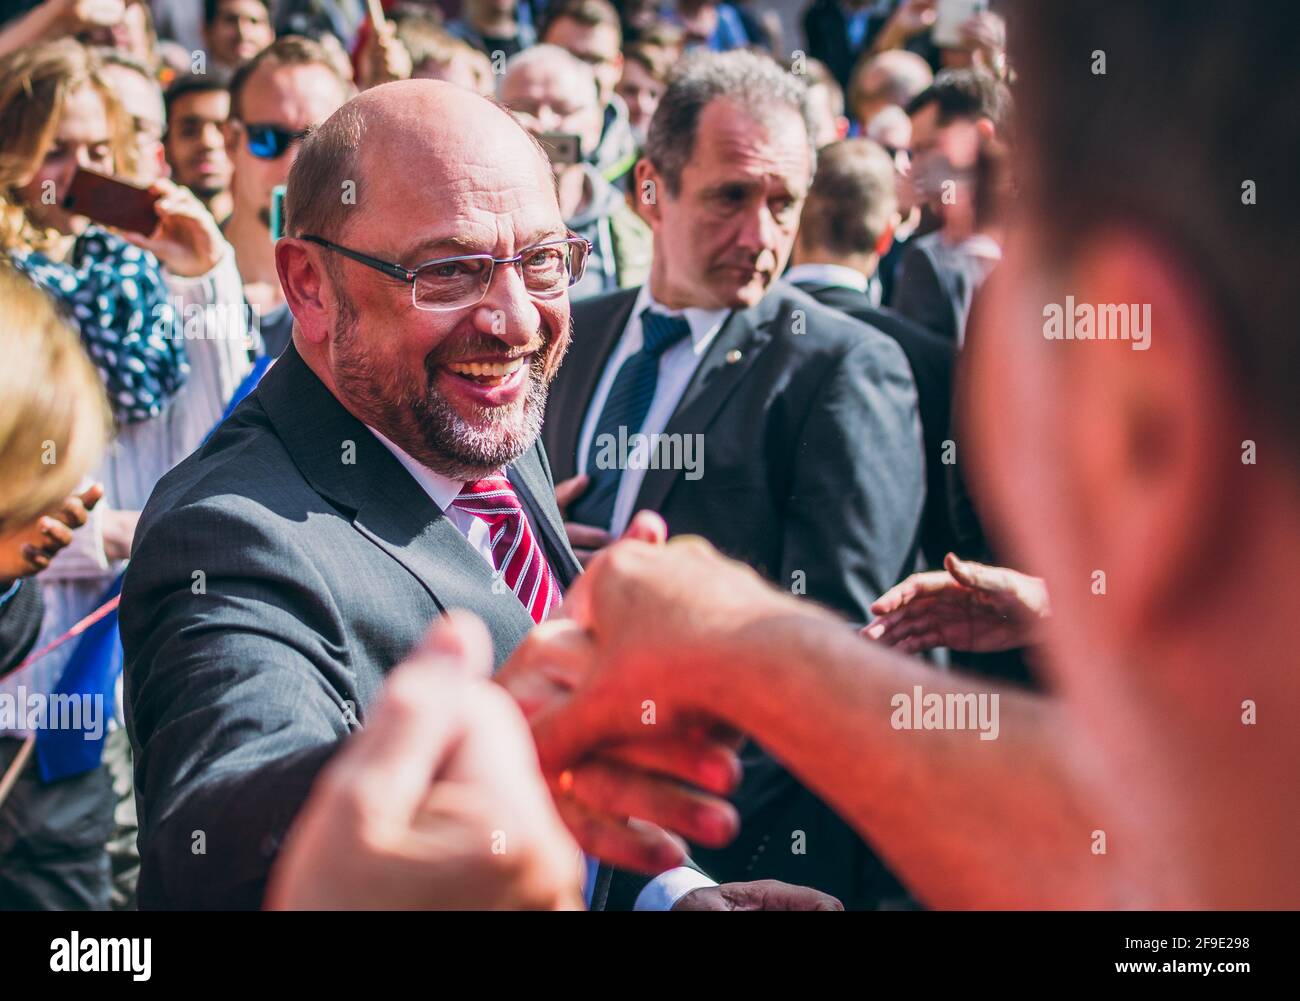 Aachen, Germany - 23 September 2017: Martin Schulz, German politician and social democrats candidate for the chancellorship meets citizens during elec Stock Photo